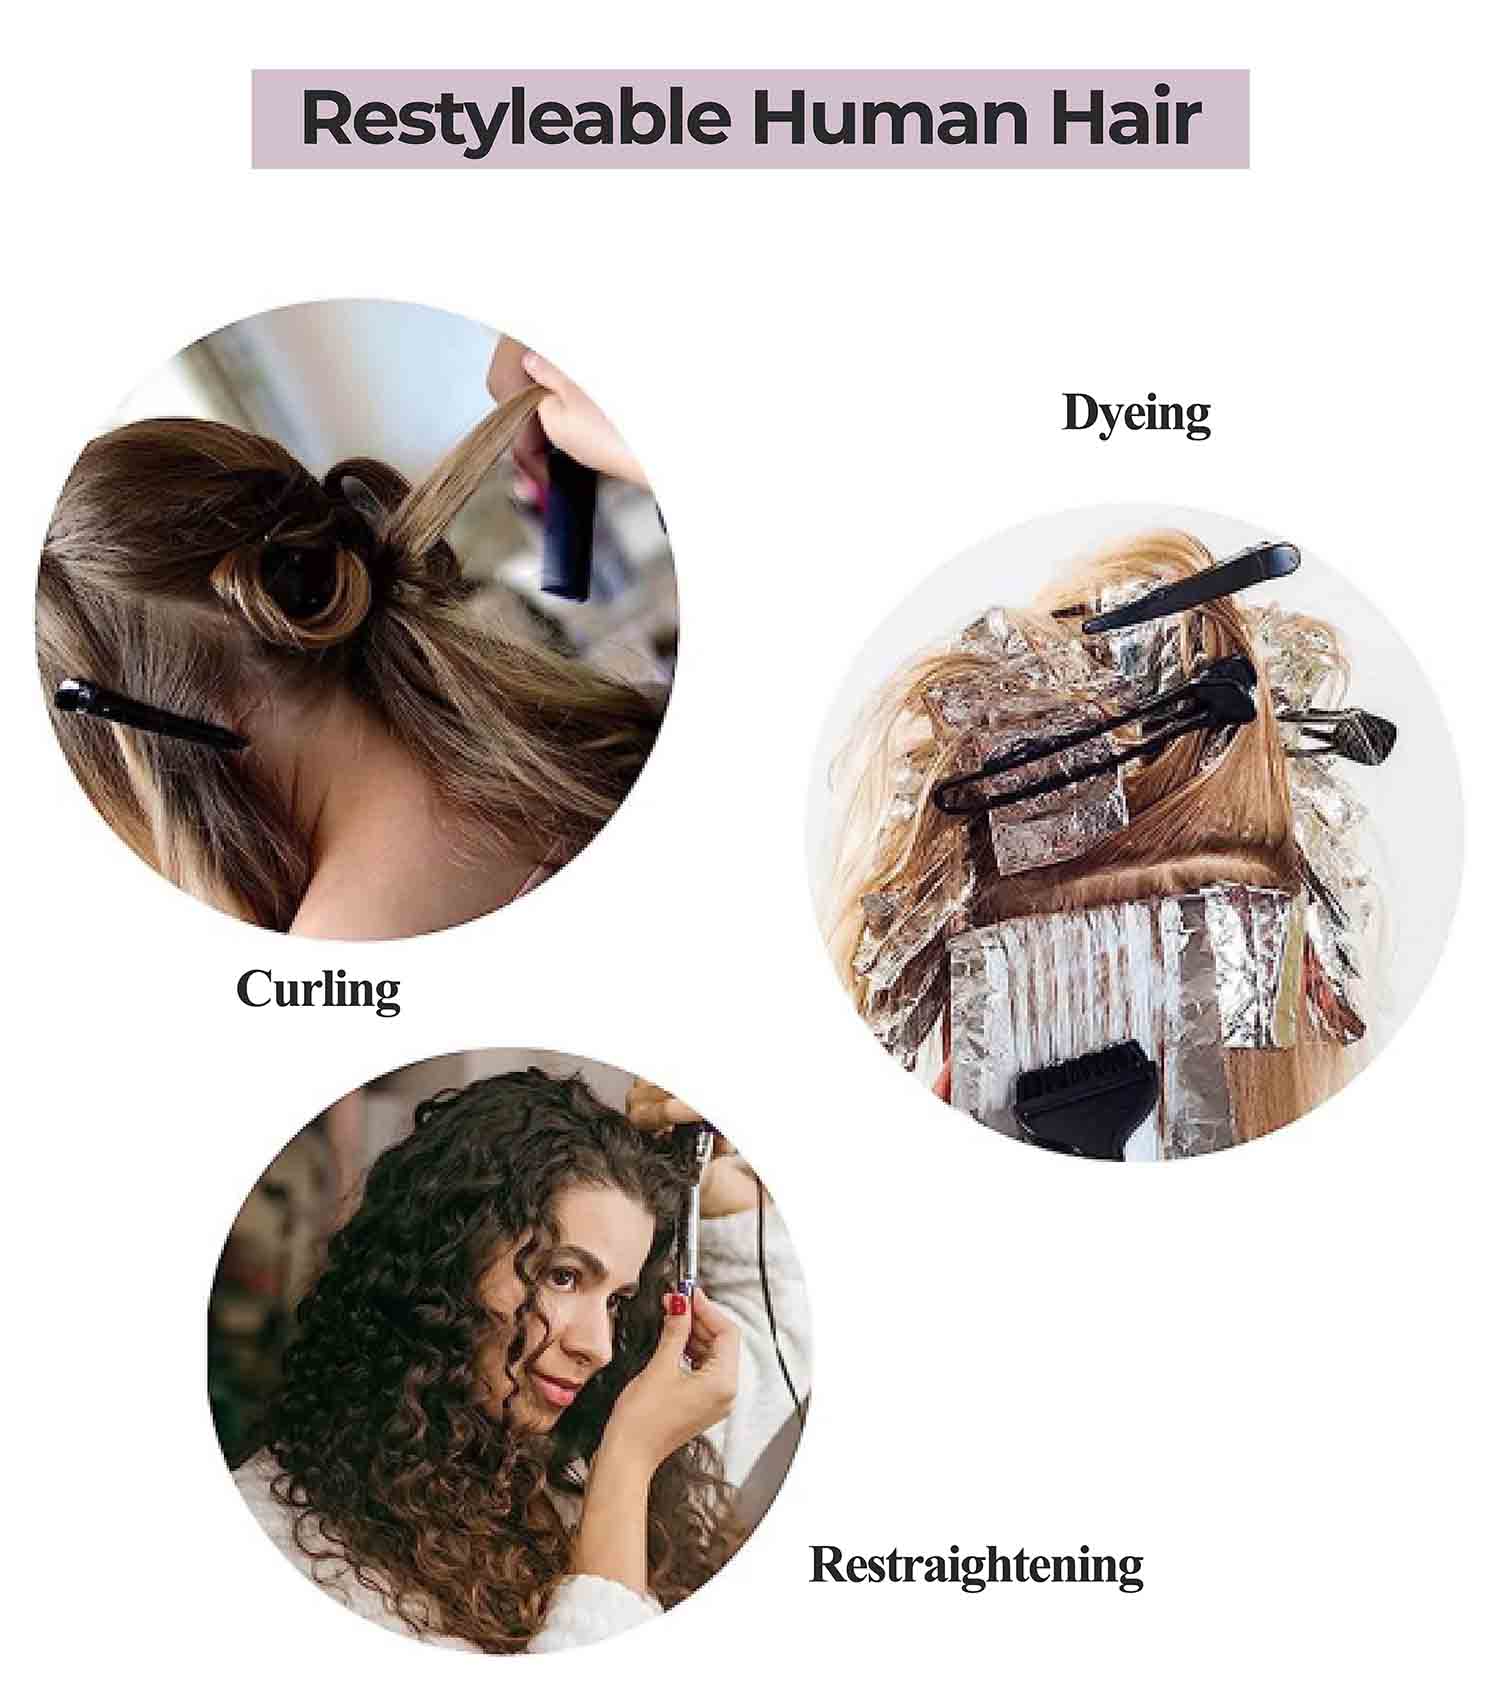 Restyleable Human Hair